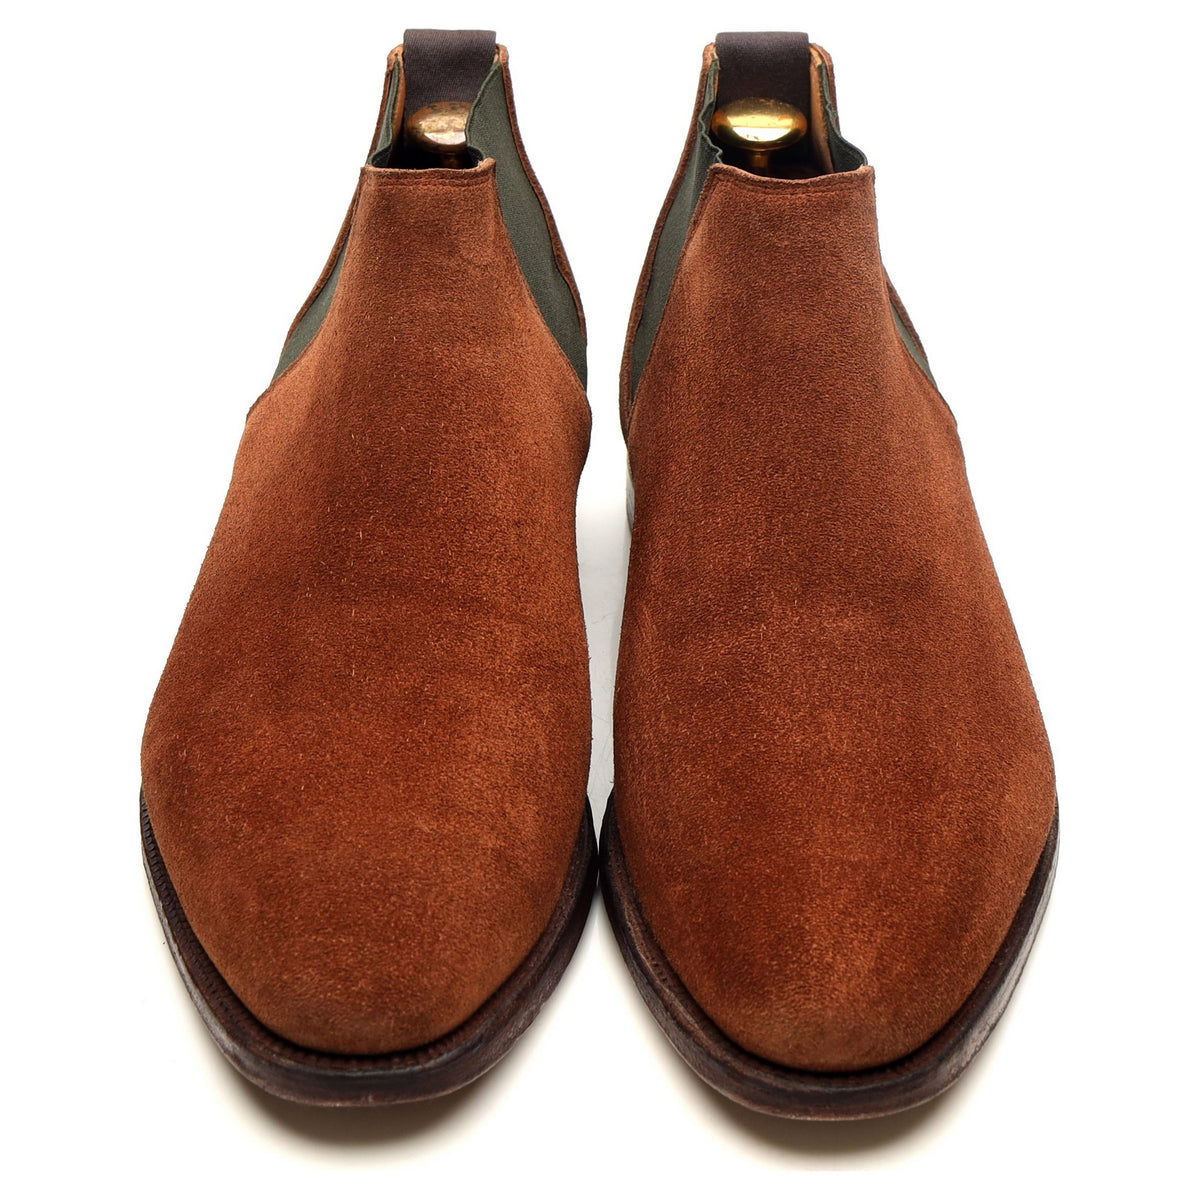 &#39;Cranford 3&#39; Tan Brown Suede Chelsea Boots UK 7 E